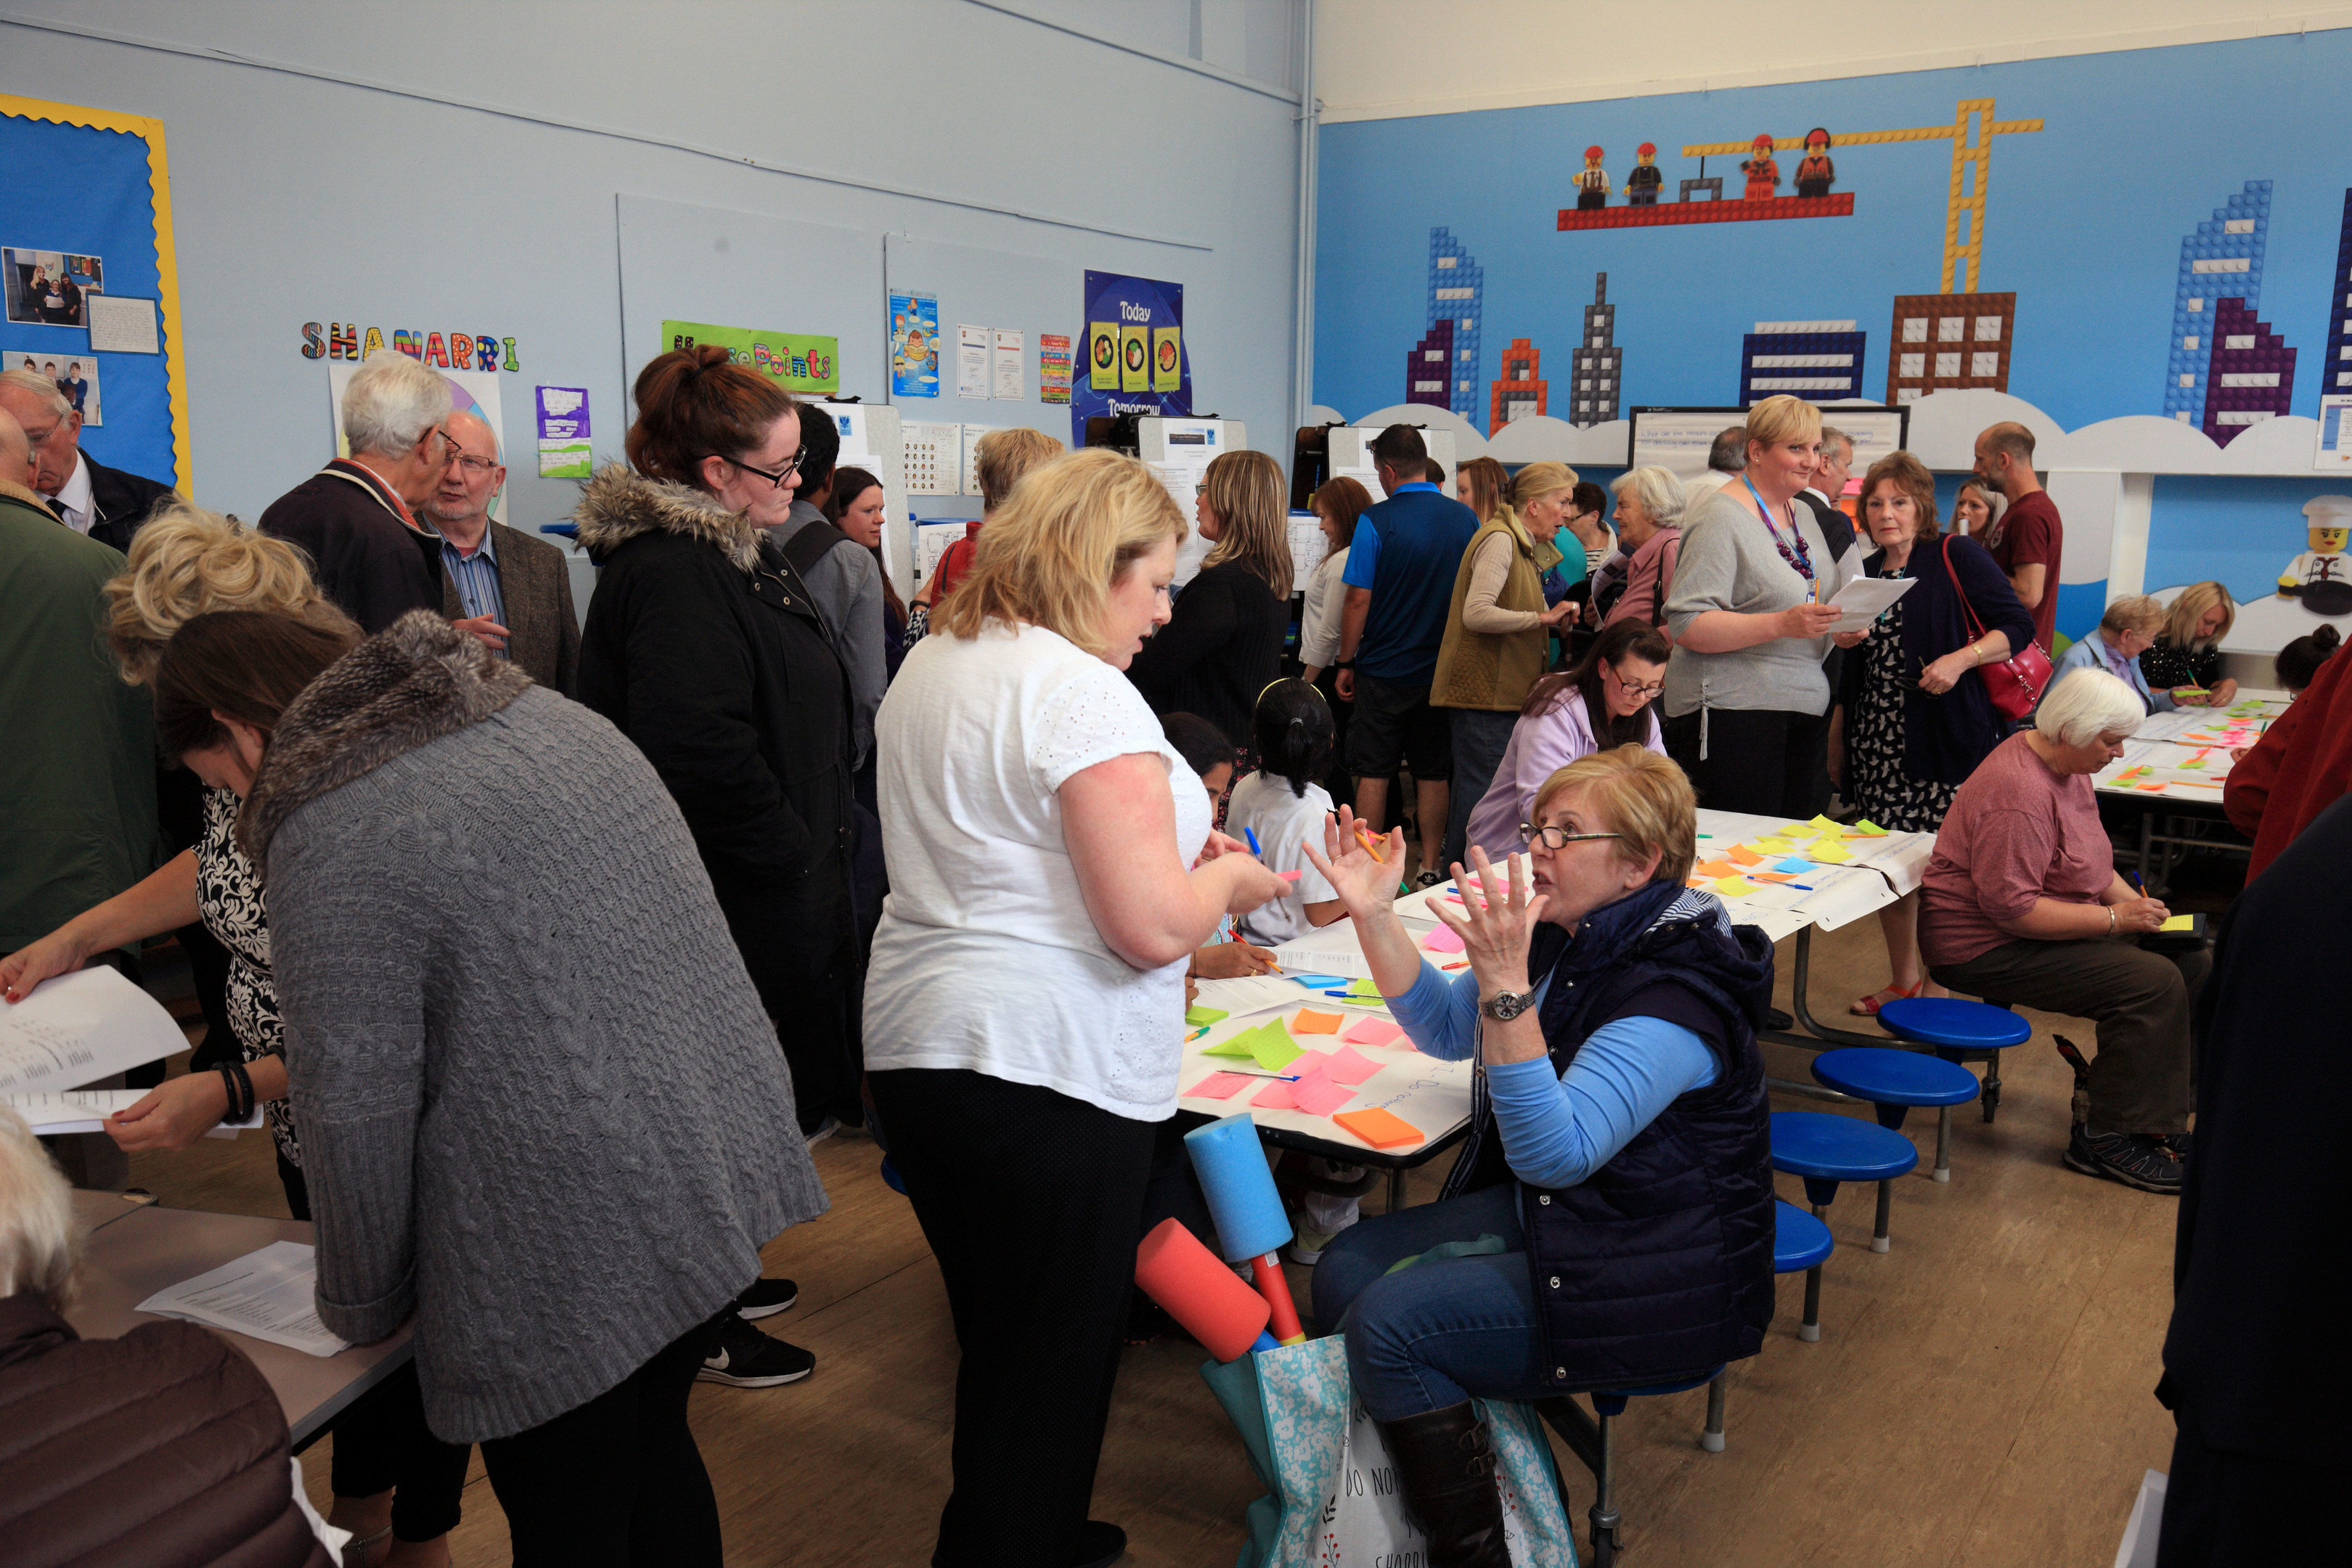 Parents at a recent consultation meeting in Perth.